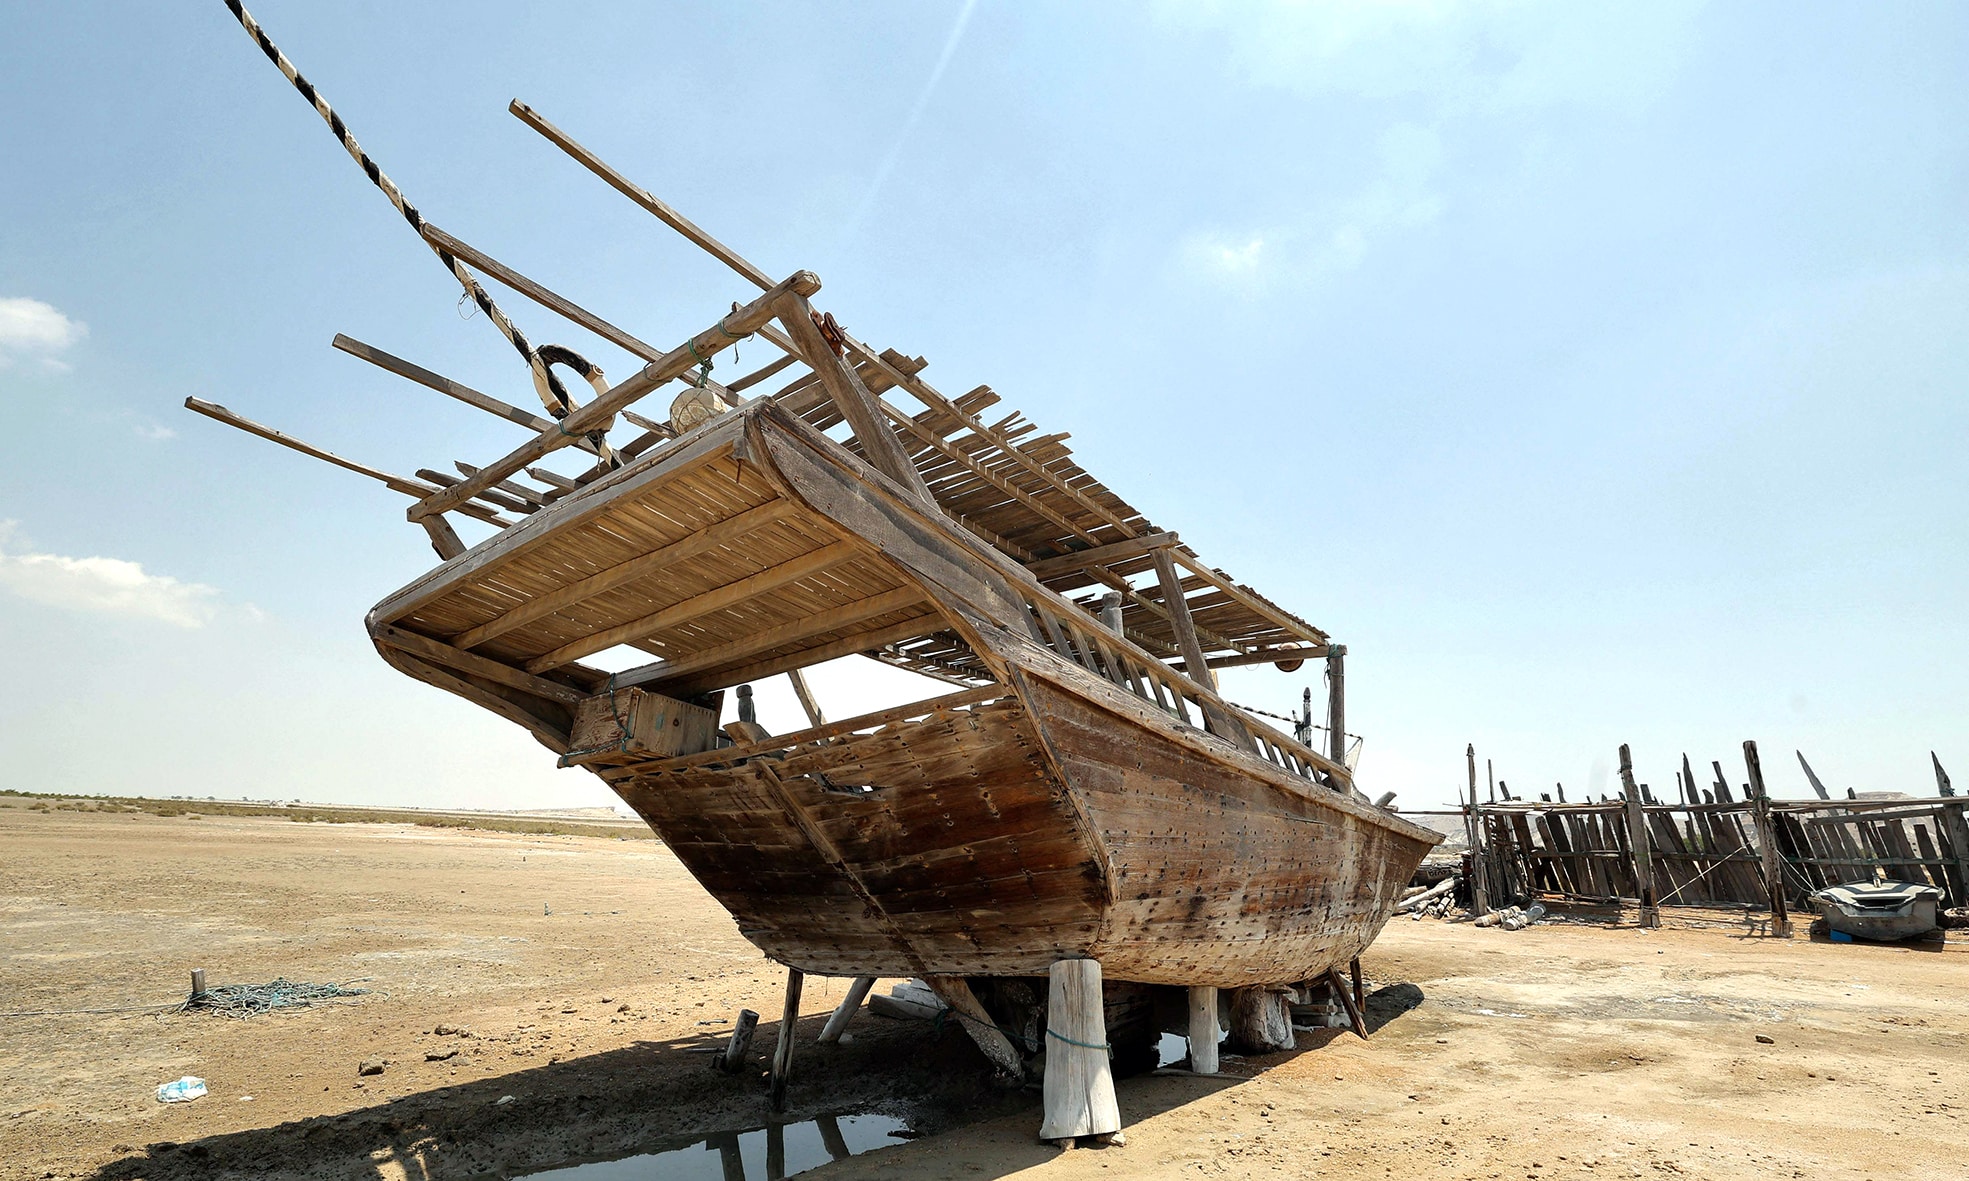 A traditional wooden ship (lenj) is laid ashore for restoration,  in Iran's touristic Qeshm island.